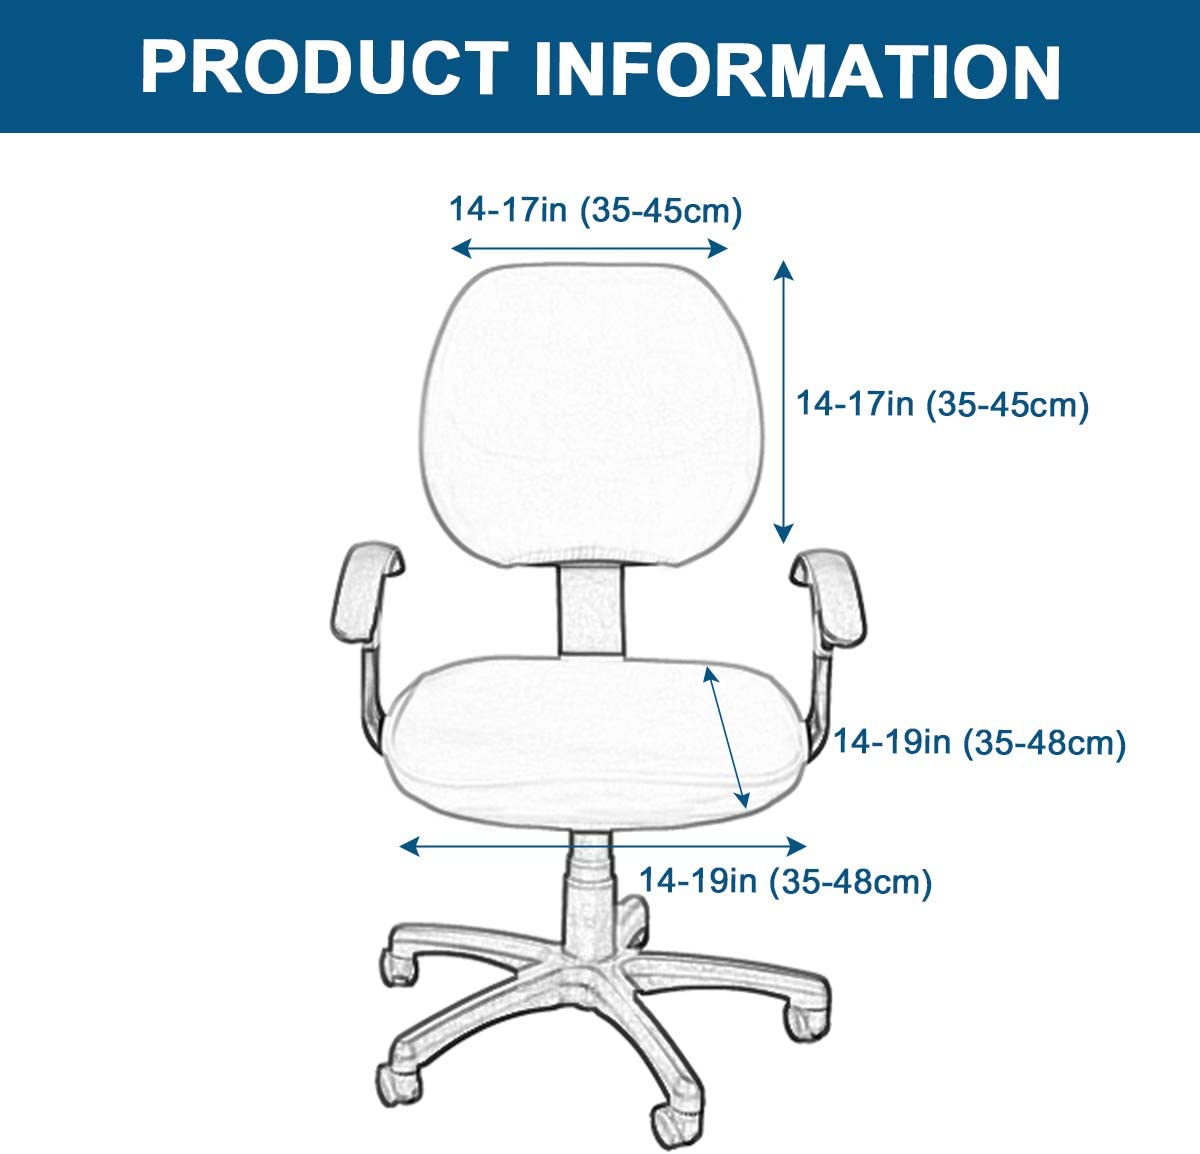 Office Chair Cover 2 Piece Stretchable Computer Office Chair Covers Universal Chair Seat Covers Stretch Rotating Chair Slipcovers Washable Spandex Desk Chair Cover Protectors - image 3 of 7